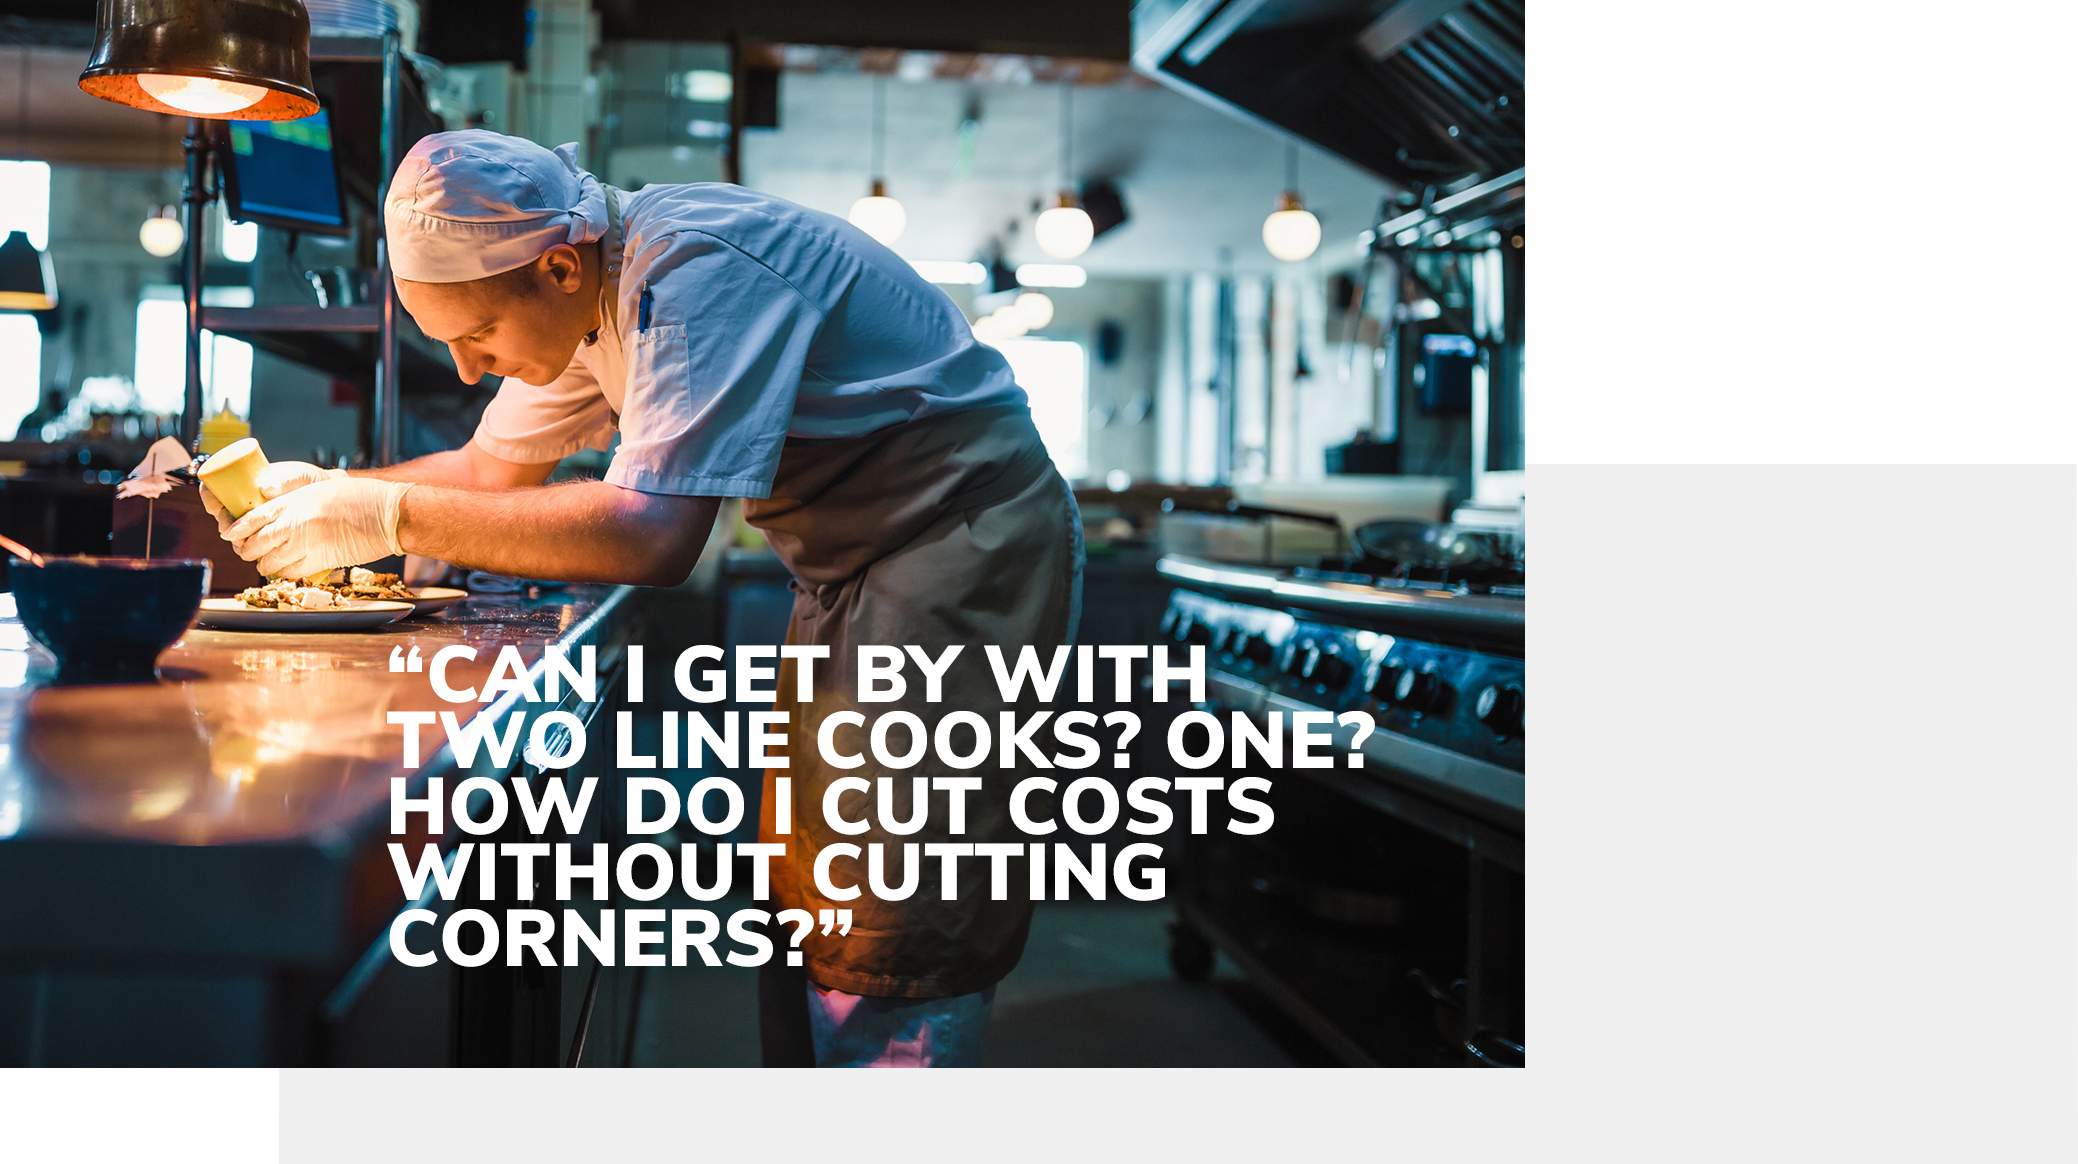 “Can I get by with two line cooks? One? How do I cut costs without cutting corners?”